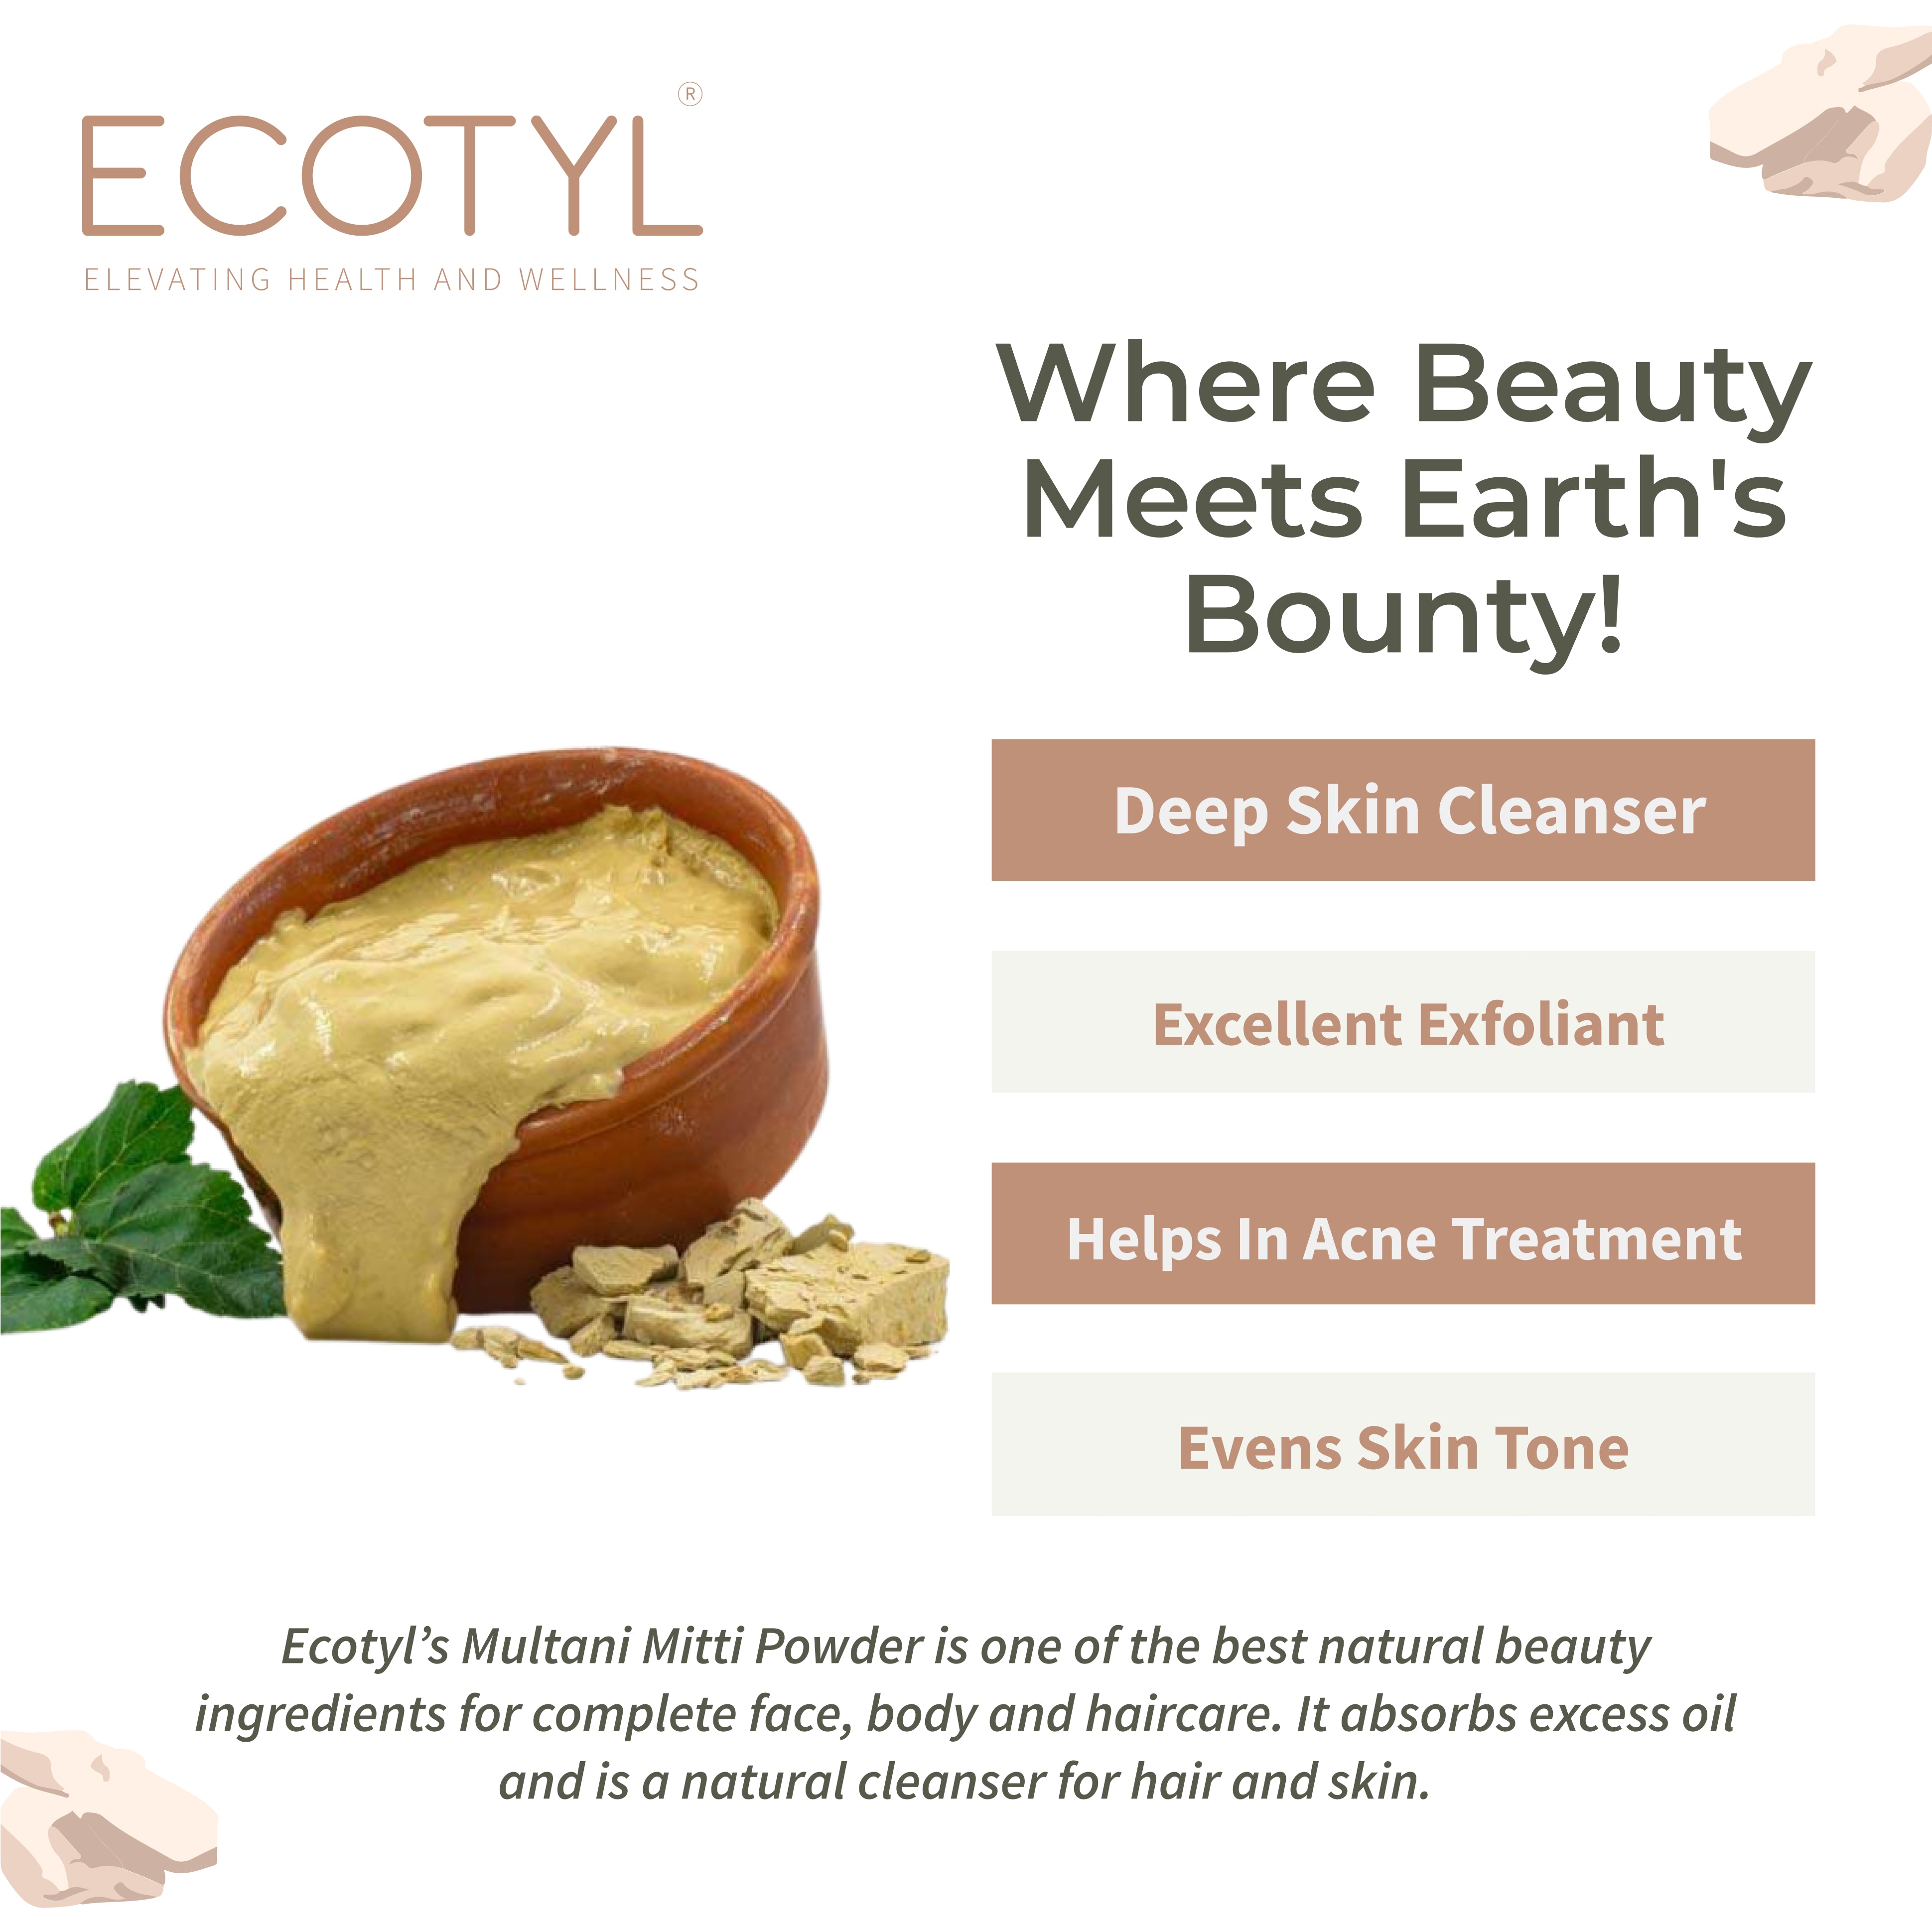 Ecotyl Pure Multani Mitti | Face Pack for Exfoliation & Clear Skin | Bentonite Clay - 150g